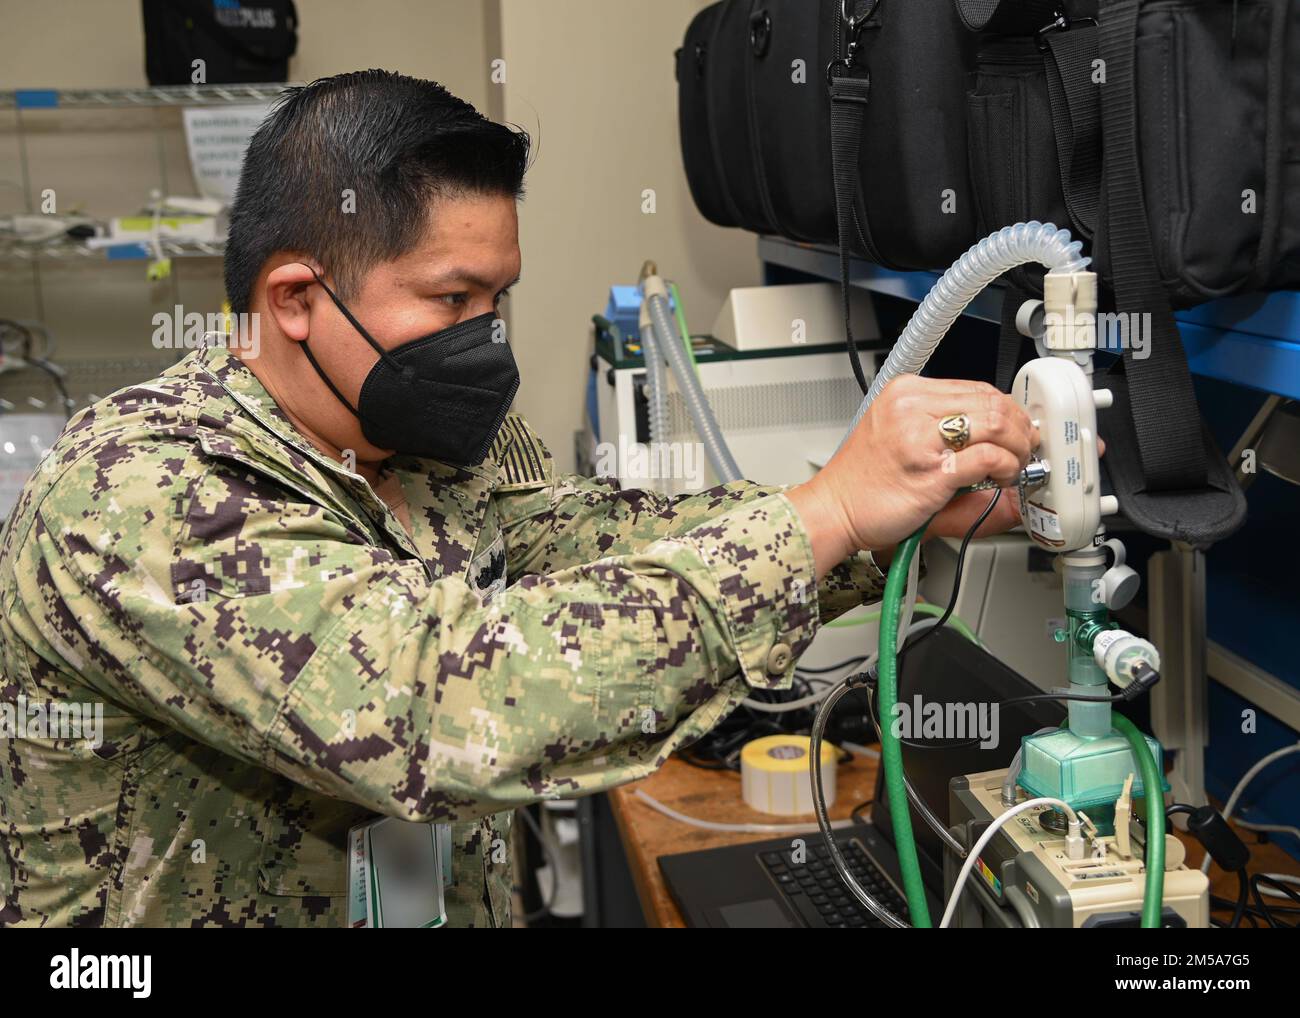 220215-N-UJ449-1013 NAVAL AIR STATION SIGONELLA, Italy (Feb. 15, 2022)— Hospital Corpsman 1st Class Victoriano Rosales, from San Diego, assigned to U.S. Navy Medicine and Readiness Training Command Sigonella, performs maintenance on a portable ventilator on Naval Air Station Sigonella, Feb. 15, 2022. NAS Sigonella’s strategic location enables U.S., allied, and partner nation forces to deploy and respond as required, ensuring security and stability in Europe, Africa and Central Command. Stock Photo